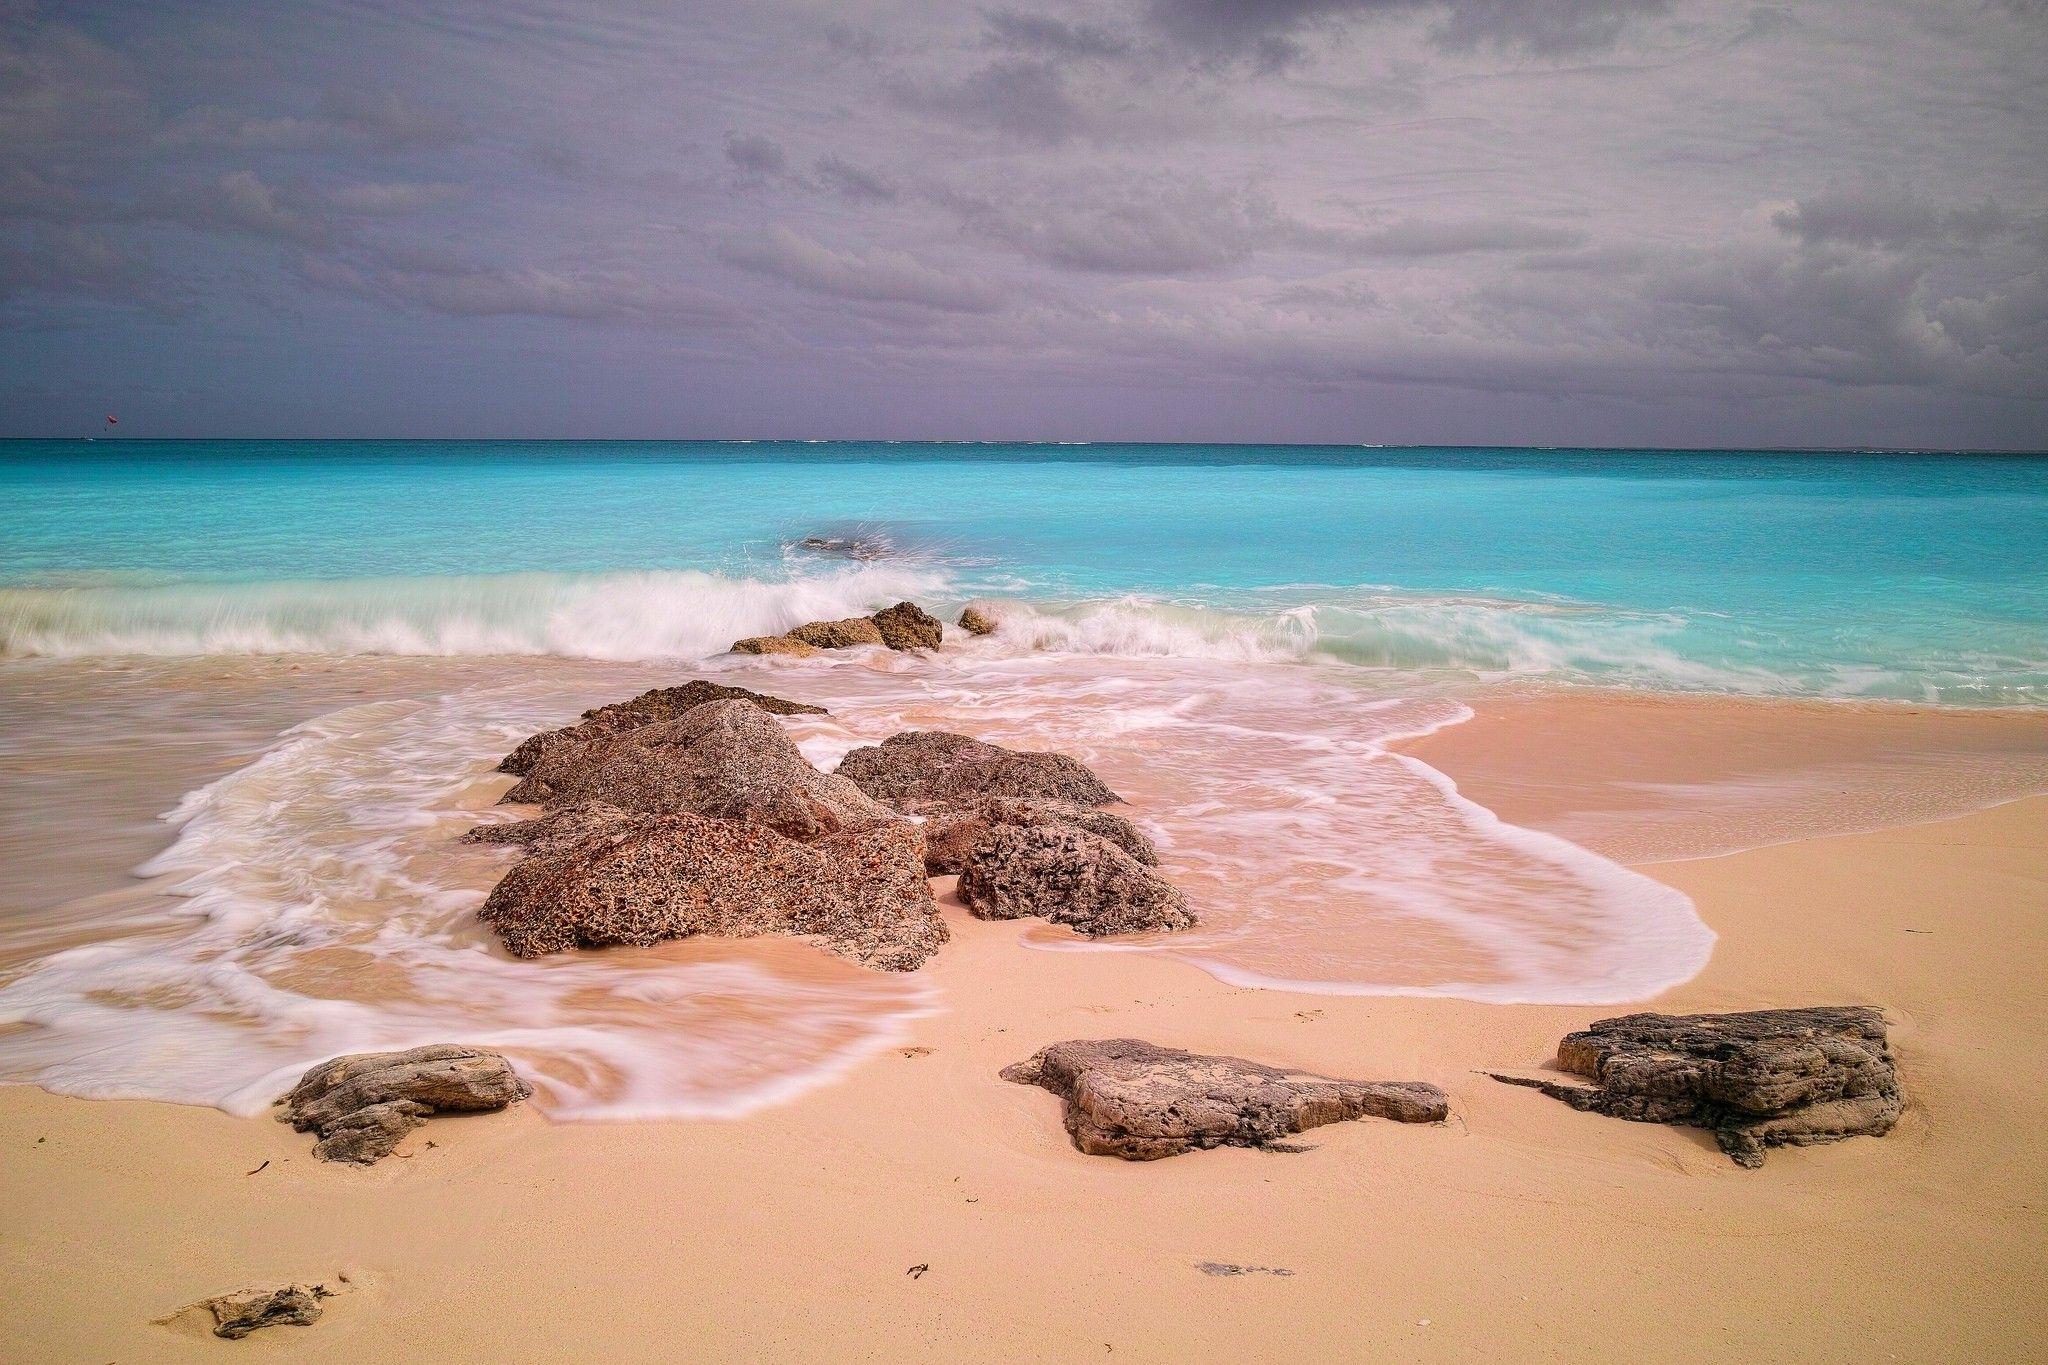 Turks and Caicos Desktop Wallpapers - Top Free Turks and Caicos Desktop